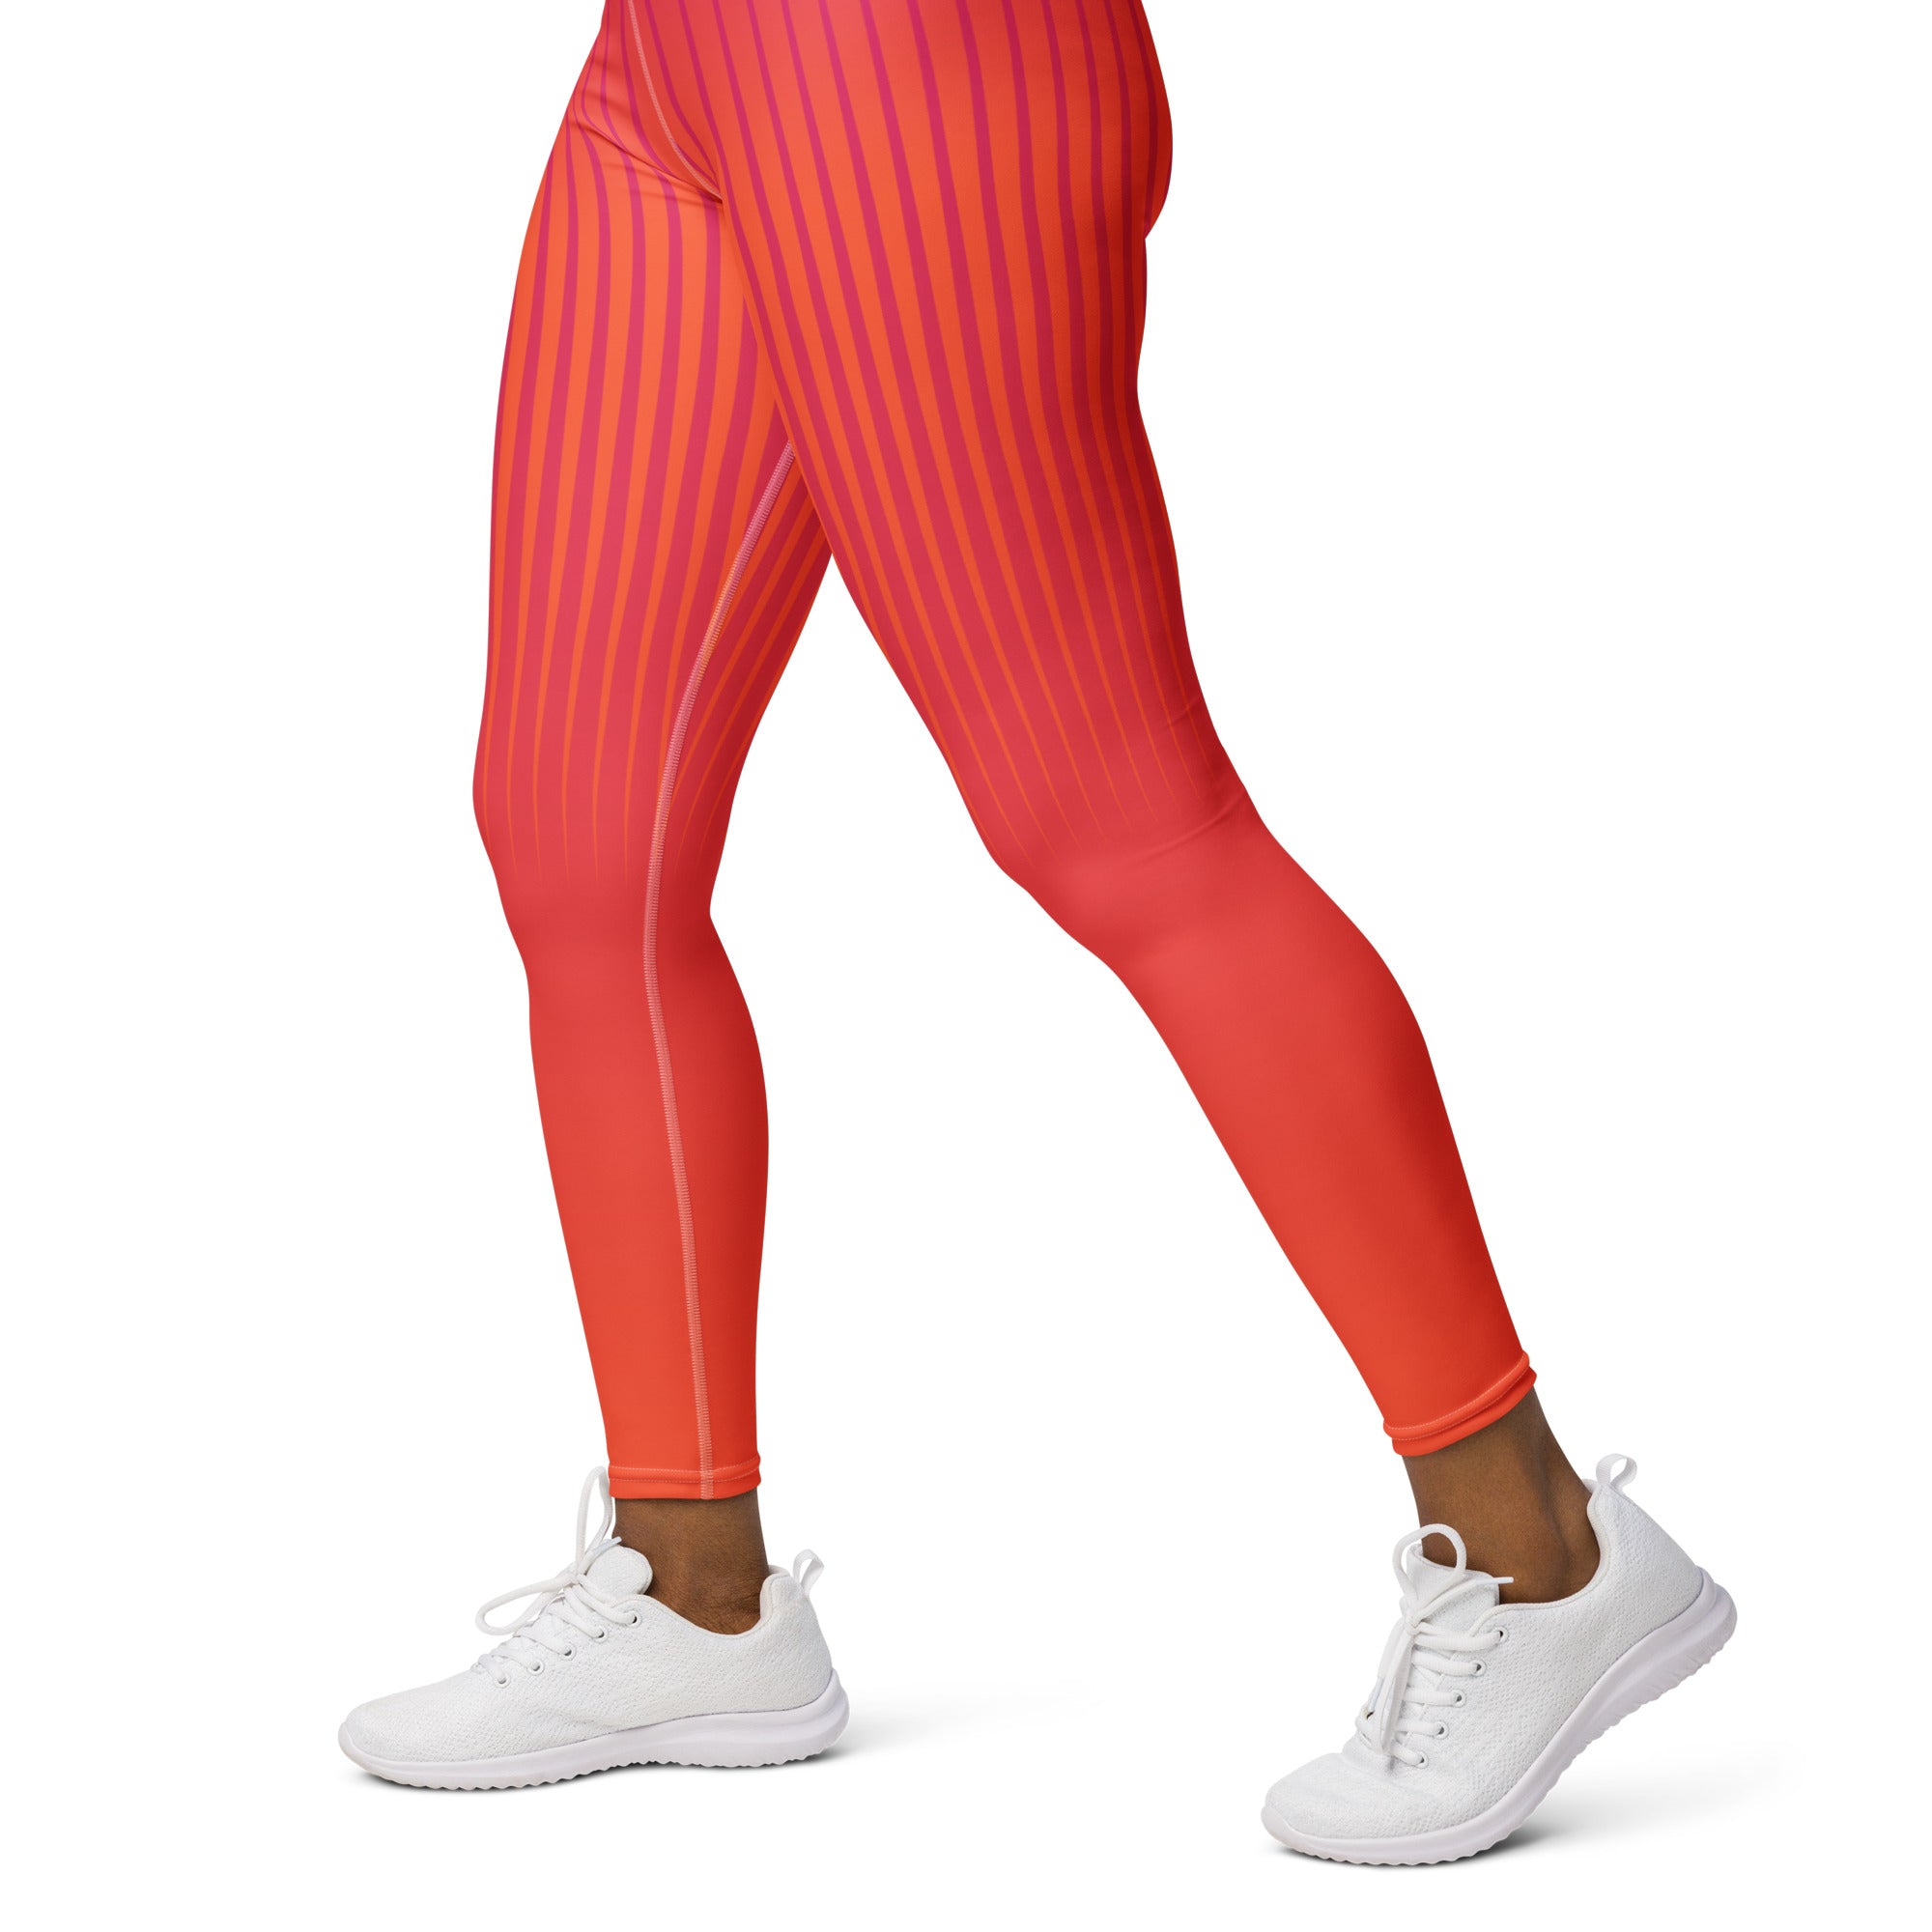 Back view of Dusk Daze Gradient Yoga Leggings showing waistband and fit